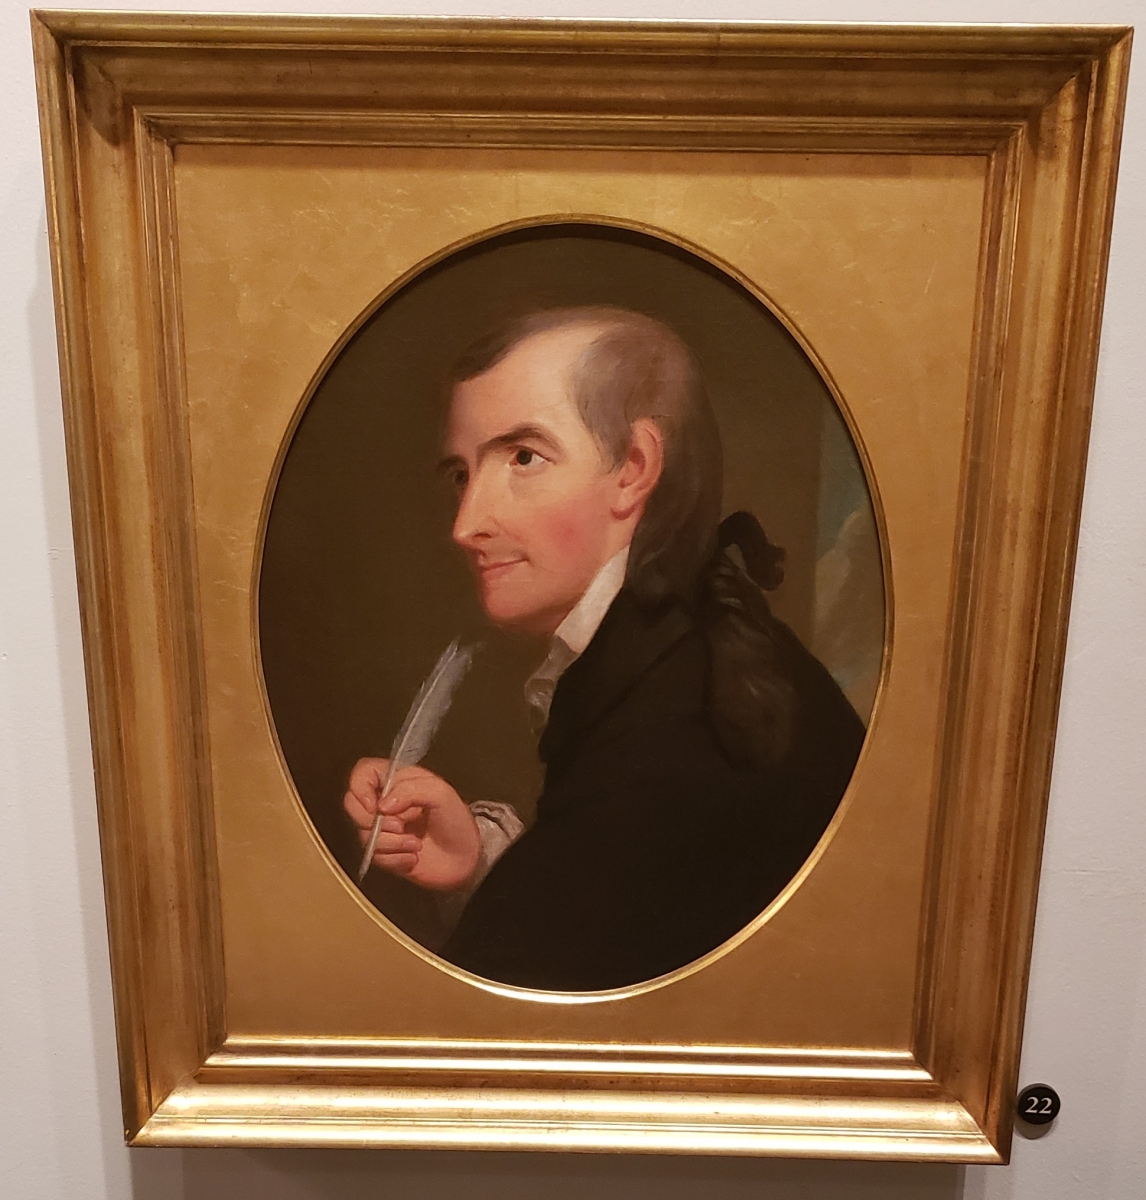 Francis Hopkinson portrait hanging in the Second Bank of the United States Portrait Gallery